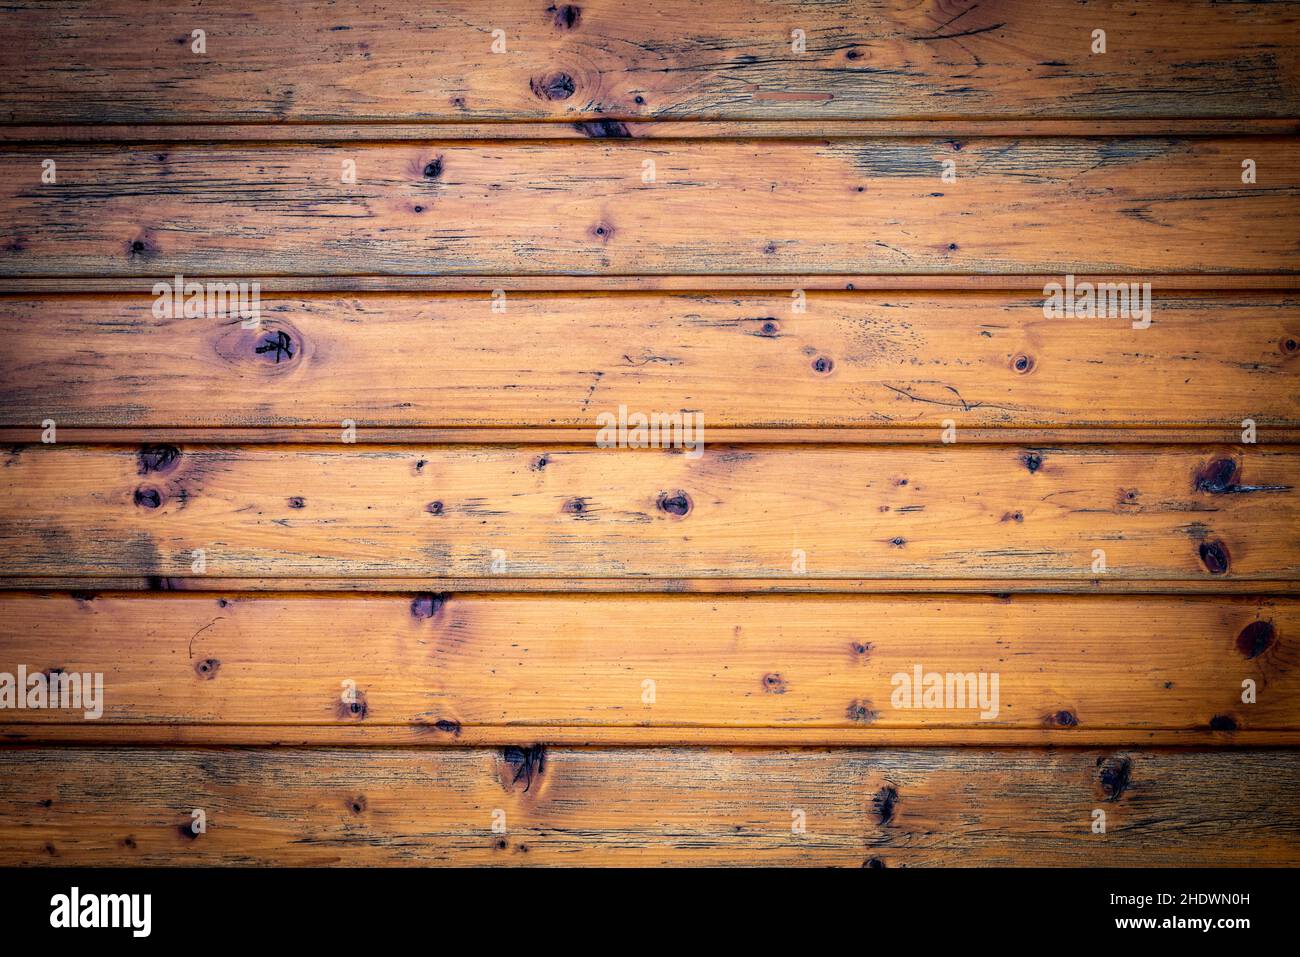 wooden wall, wood panelling, wooden boards, wooden walls, wooden board Stock Photo